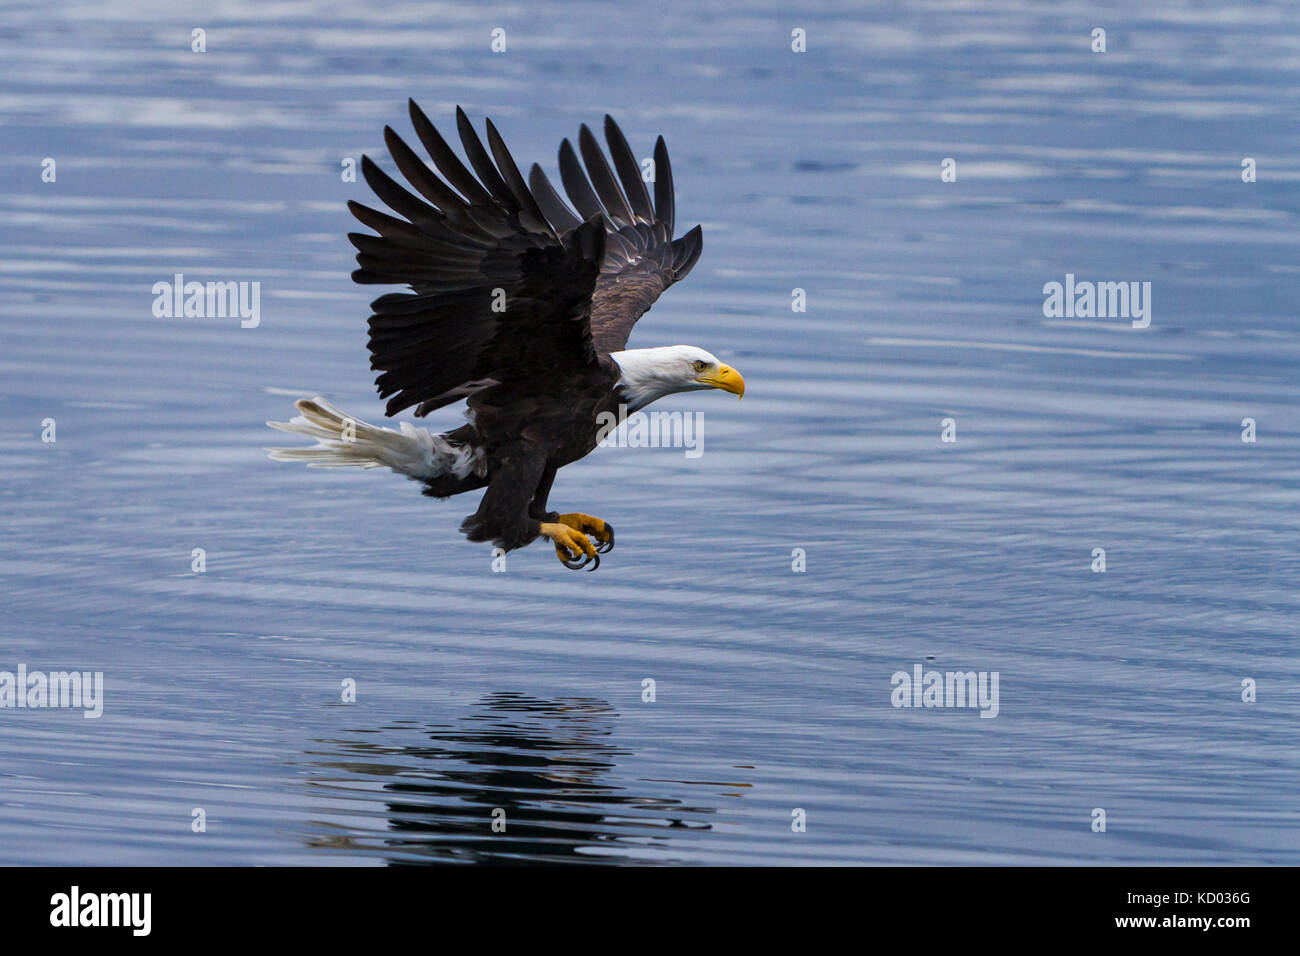 Adult bald eagle flying low over water ready to catch a fish in Broughton Archipelago Marine Provincial Park of northern Vancouver Island, British Columbia, Canada. Stock Photo